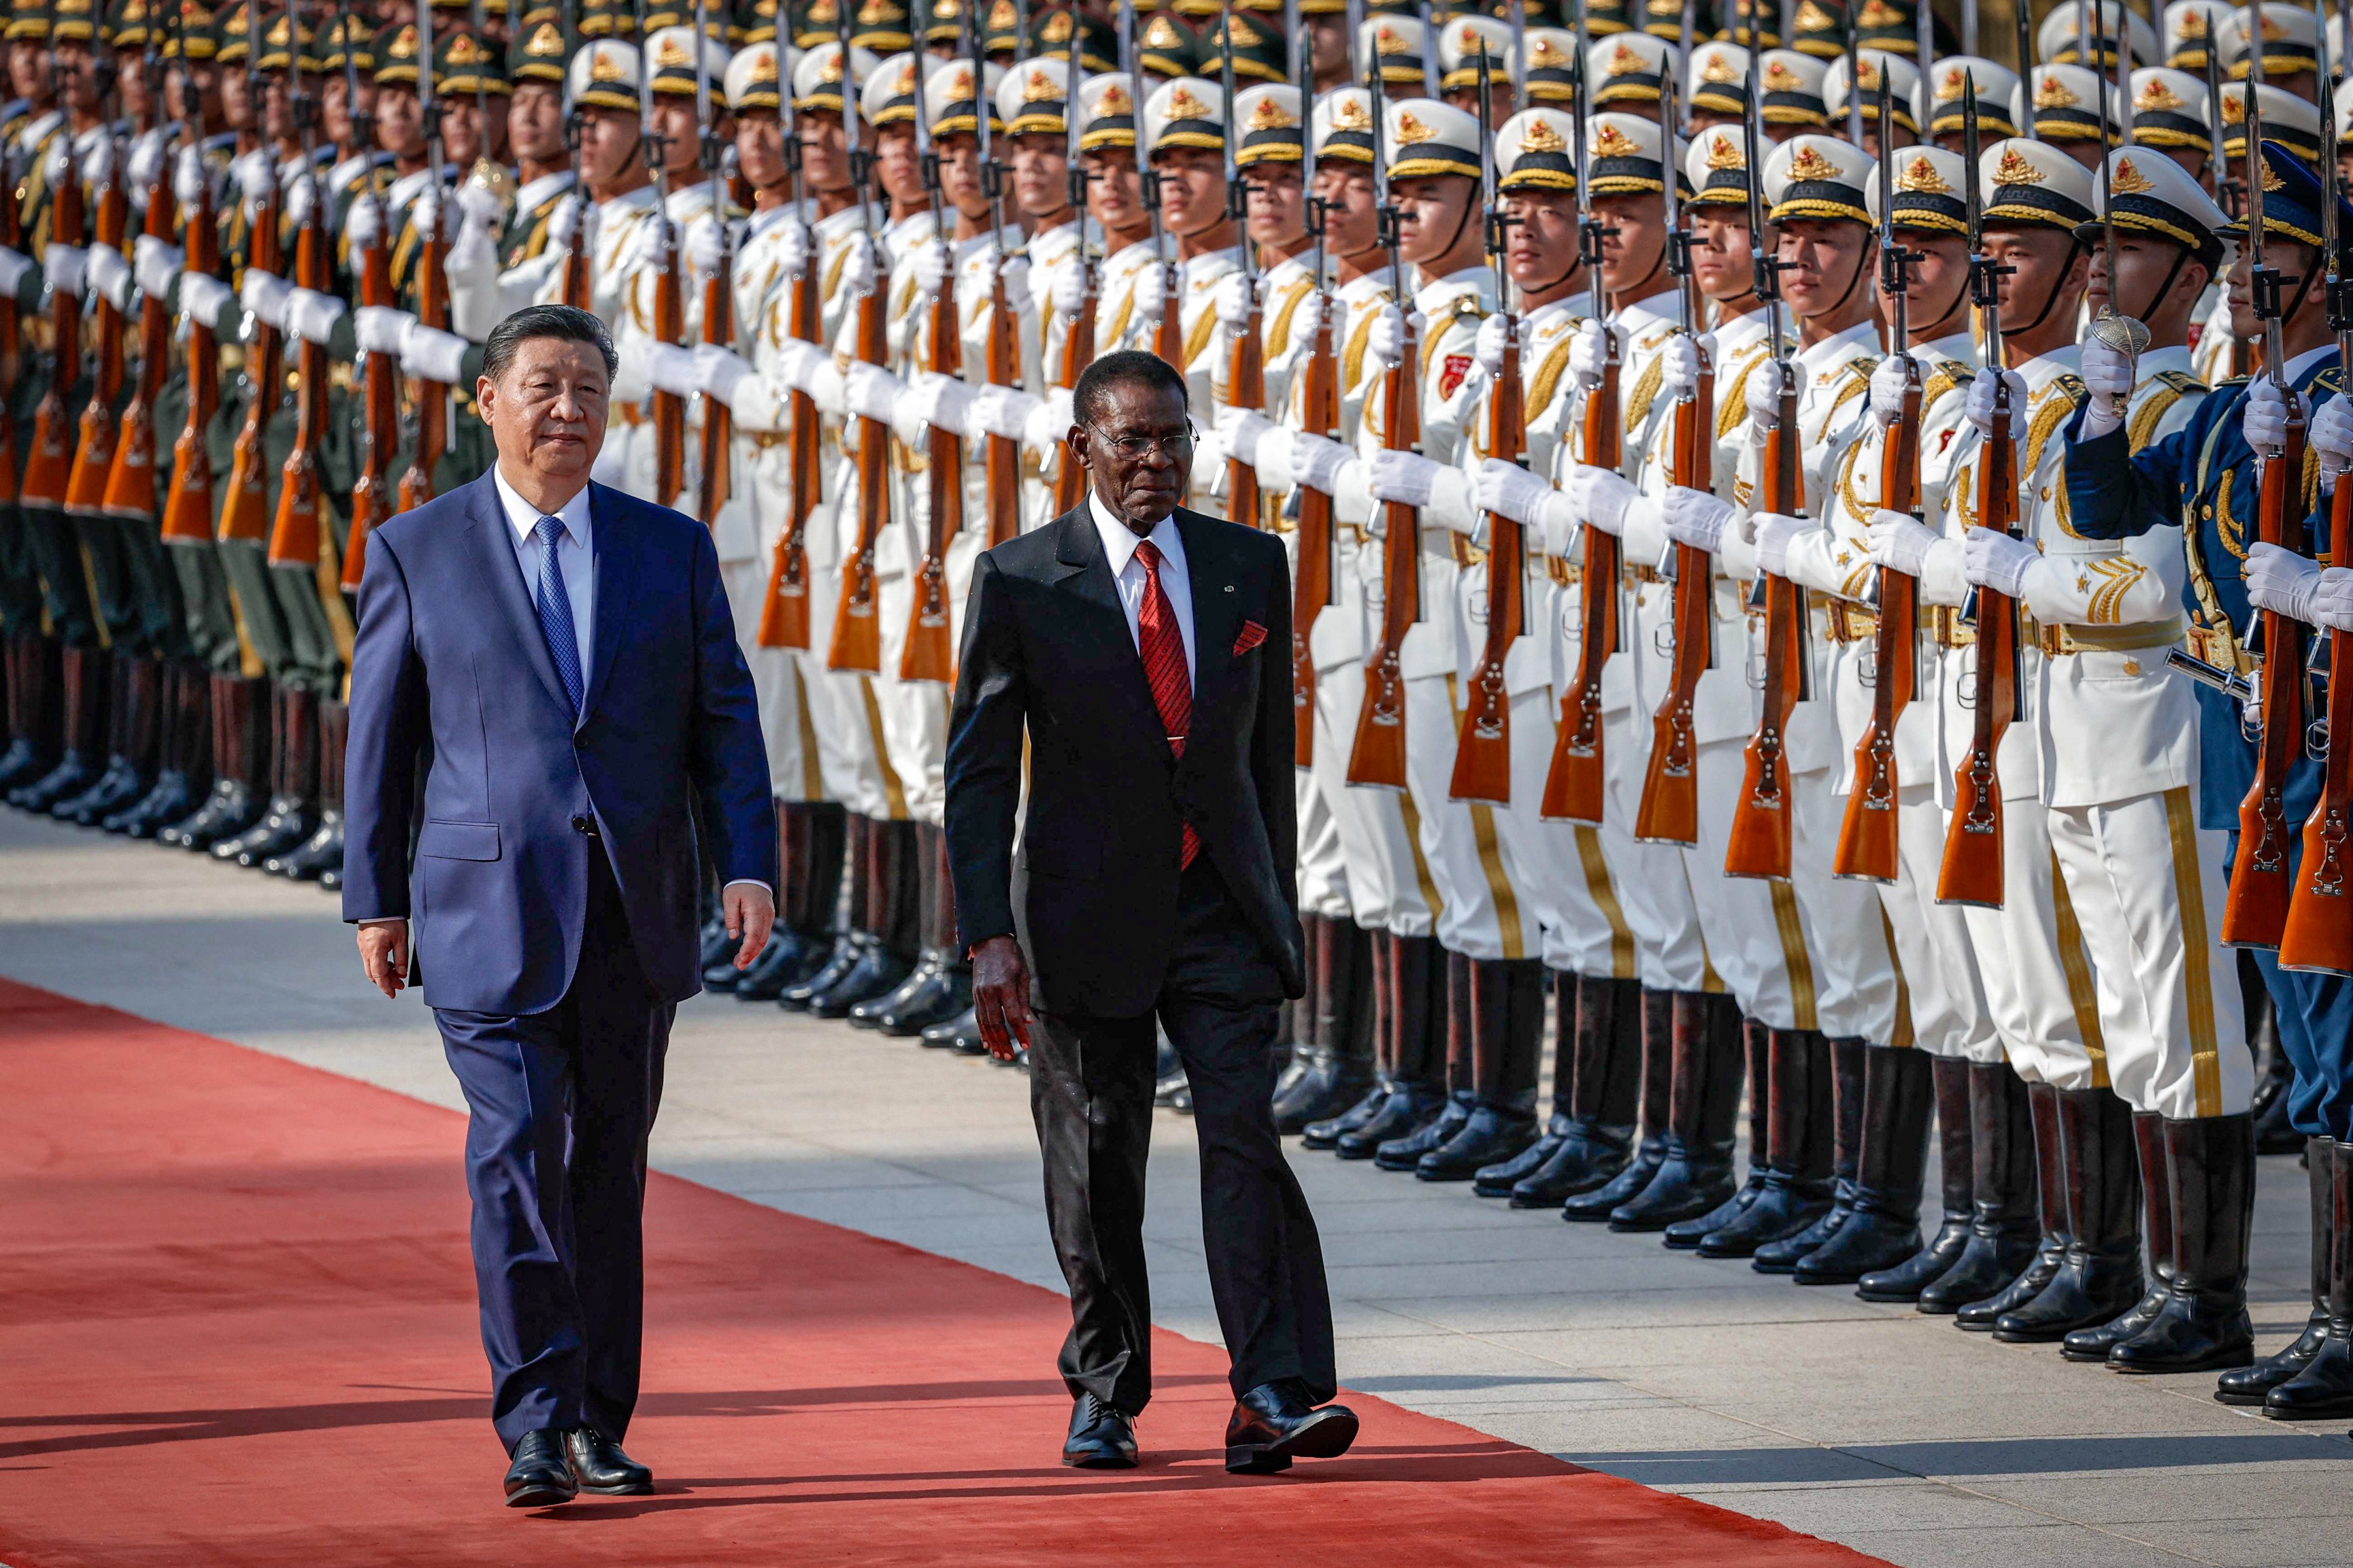 Chinese President Xi Jinping  and President of Equatorial Guinea Teodoro Obiang Nguema Mbasogo attend a welcome ceremony at the Great Hall of the People in Beijing on Tuesday. Photo: AFP